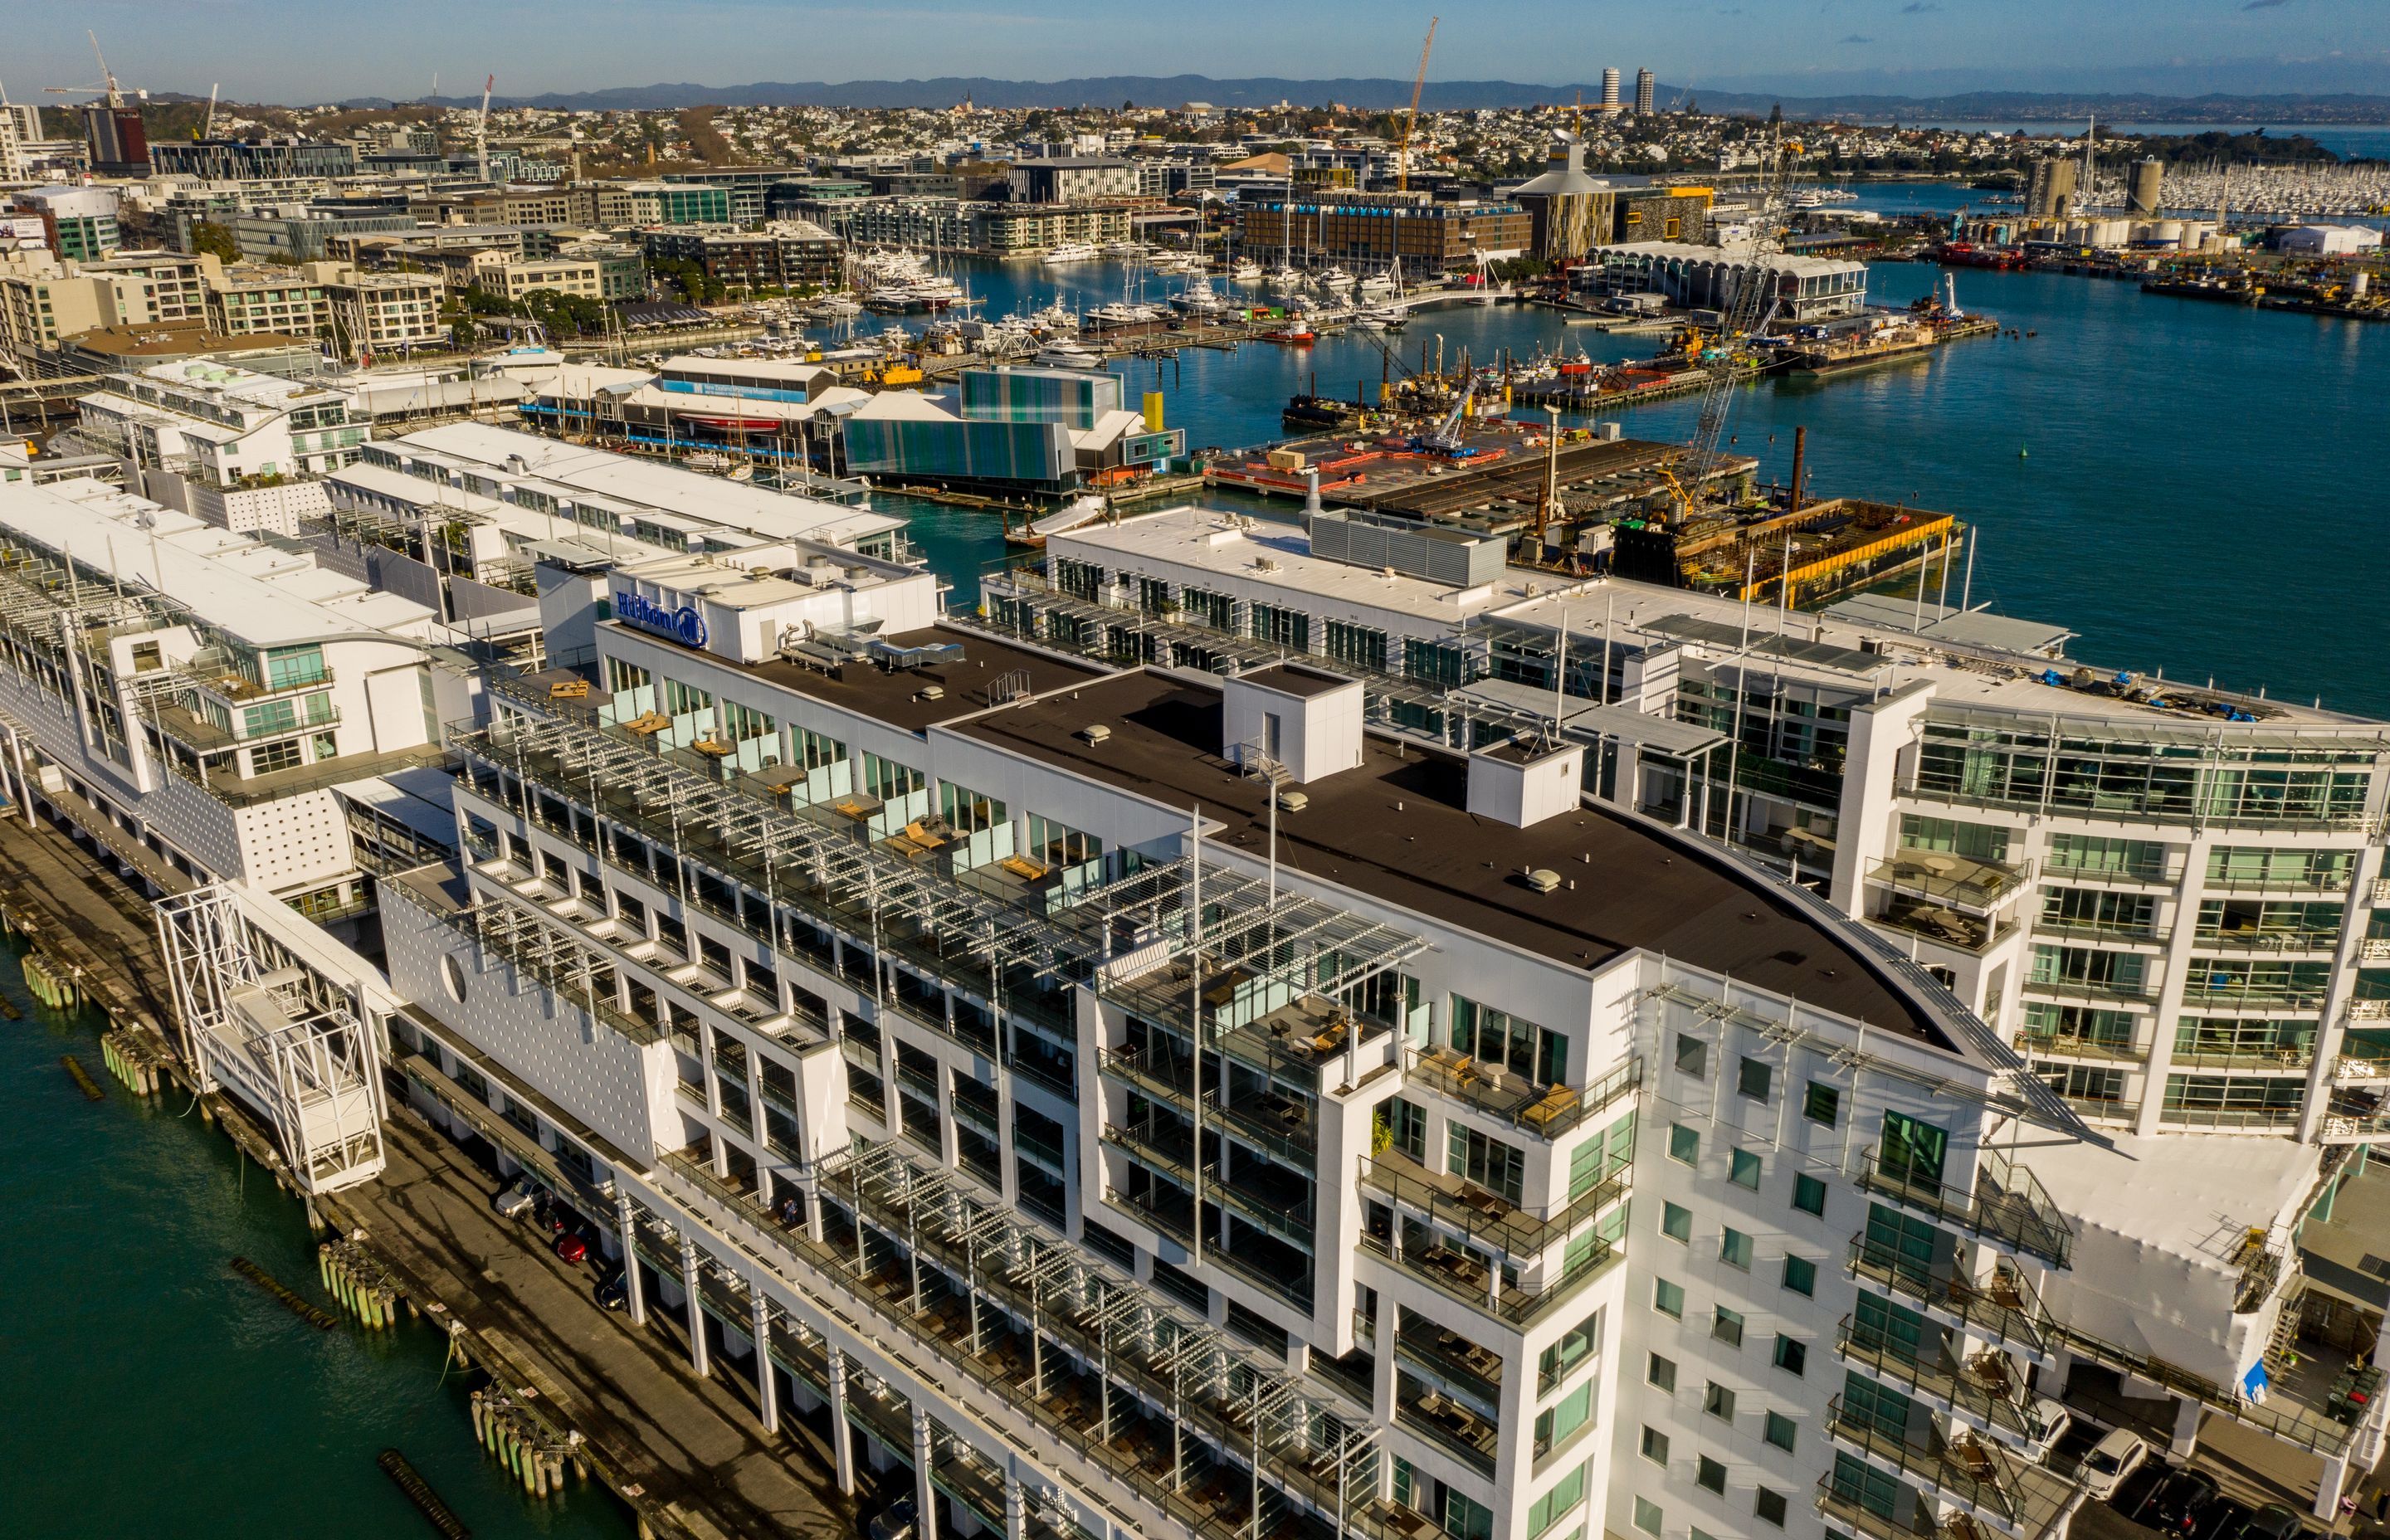 Opened in 2001, the Hilton Hotel is a 187-room, five-star hotel situated at the end of Princes Wharf on Auckland’s waterfront.